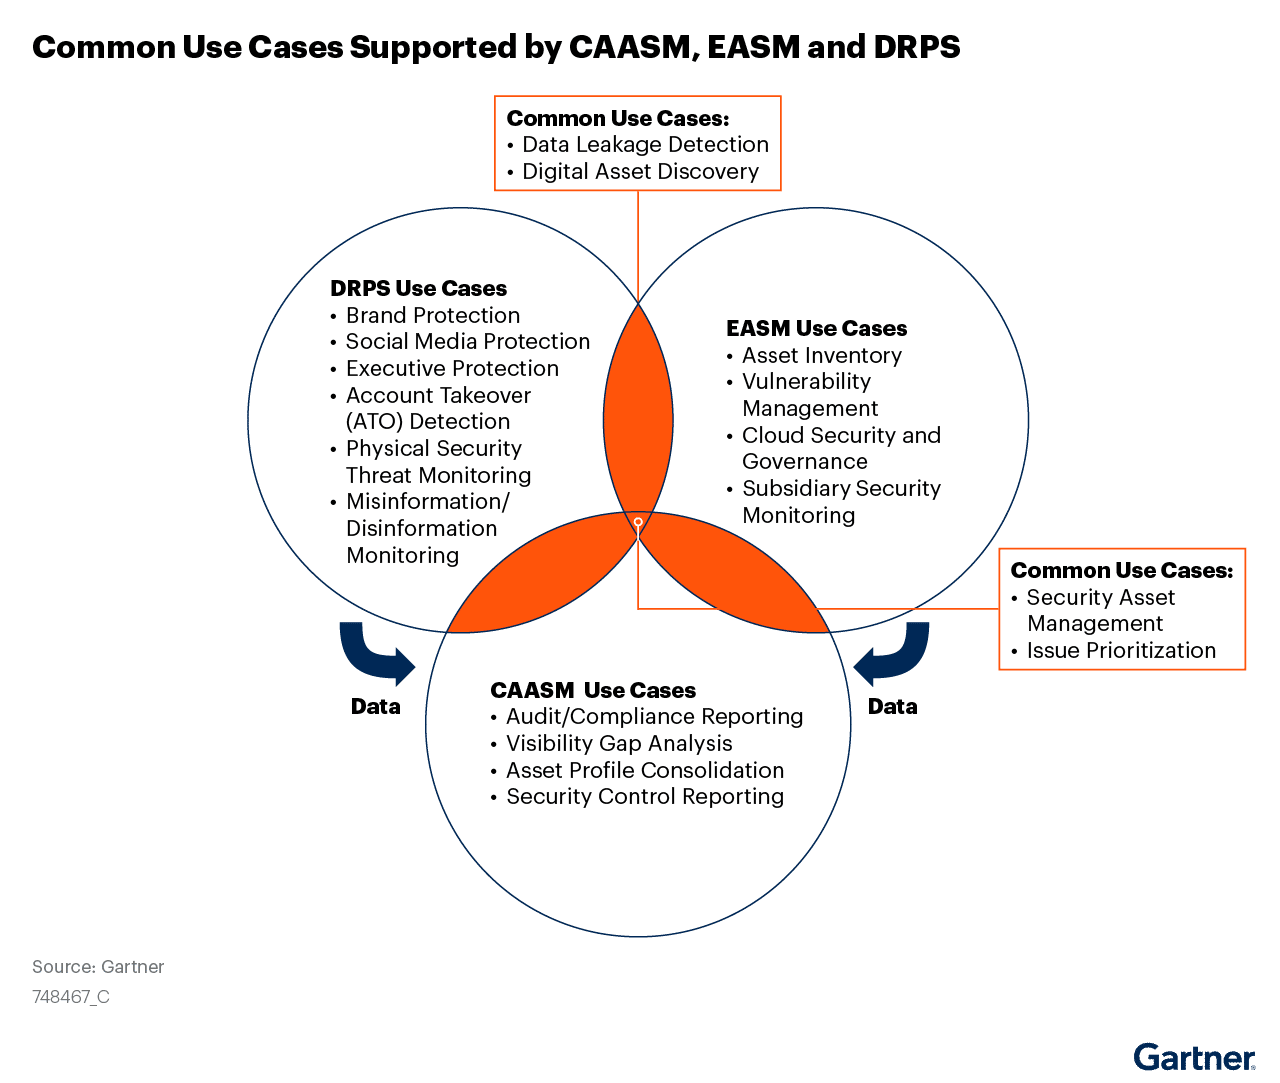 Gartner Innovation Insight for Attack Surface Management lists common use cases supported by CAASM, EASM and DRPS